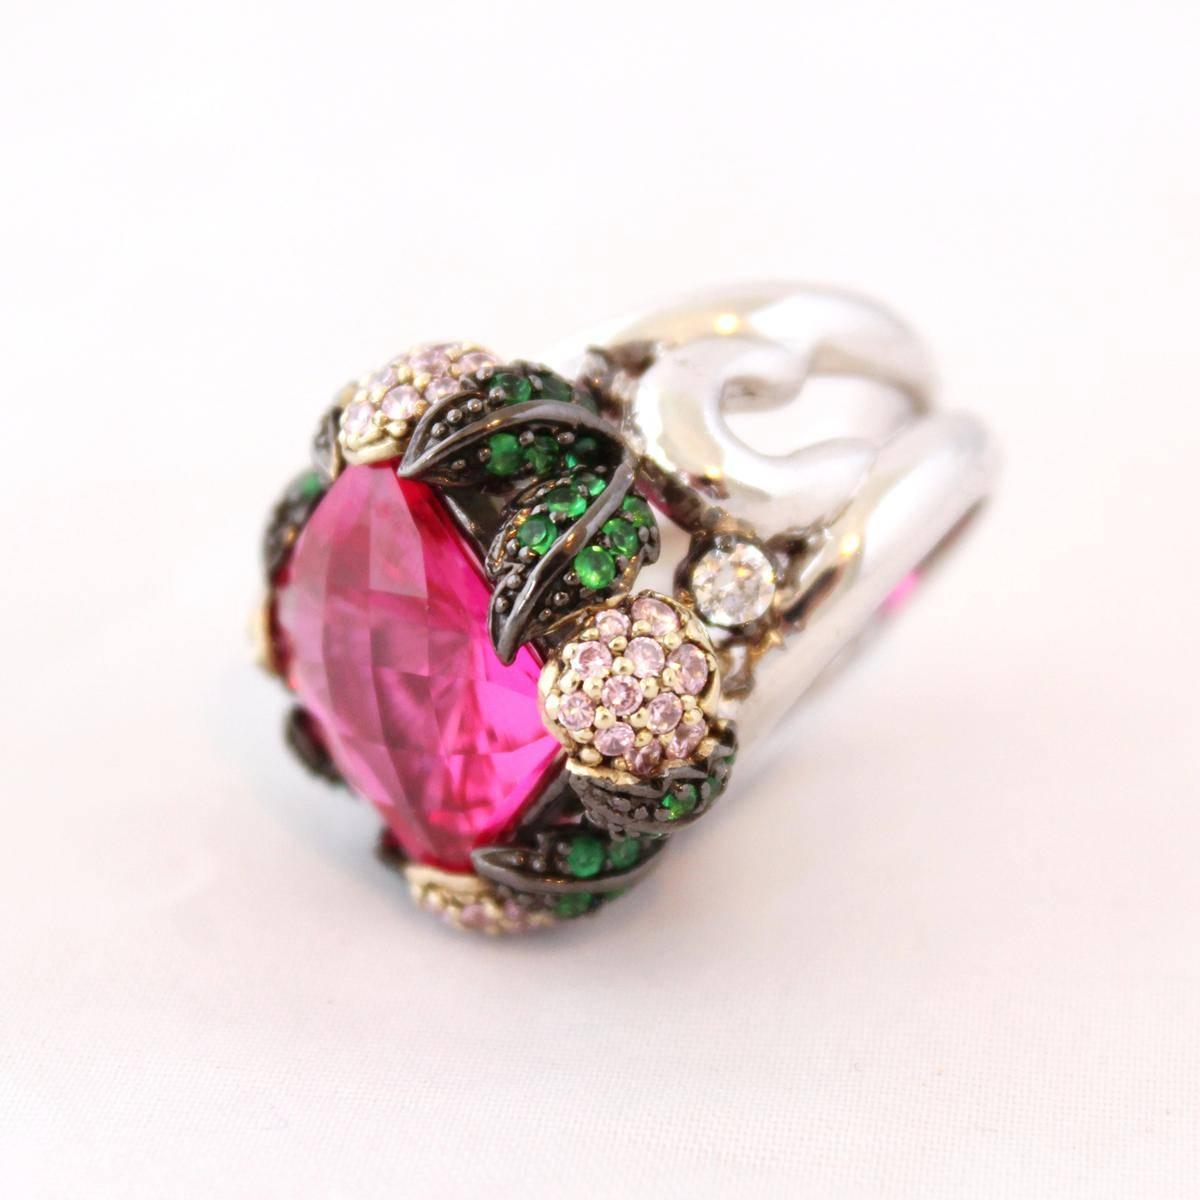 Stunning piece by Carlo Zini Milano
One of the greatest world fashion jewelry designers
Vintage, Dior style
Silver
Green and rose swarovski crystals 
Large central fuchsia glass
Size 60 (19.11 mm)
Unique piece
100% Artisanal work made in